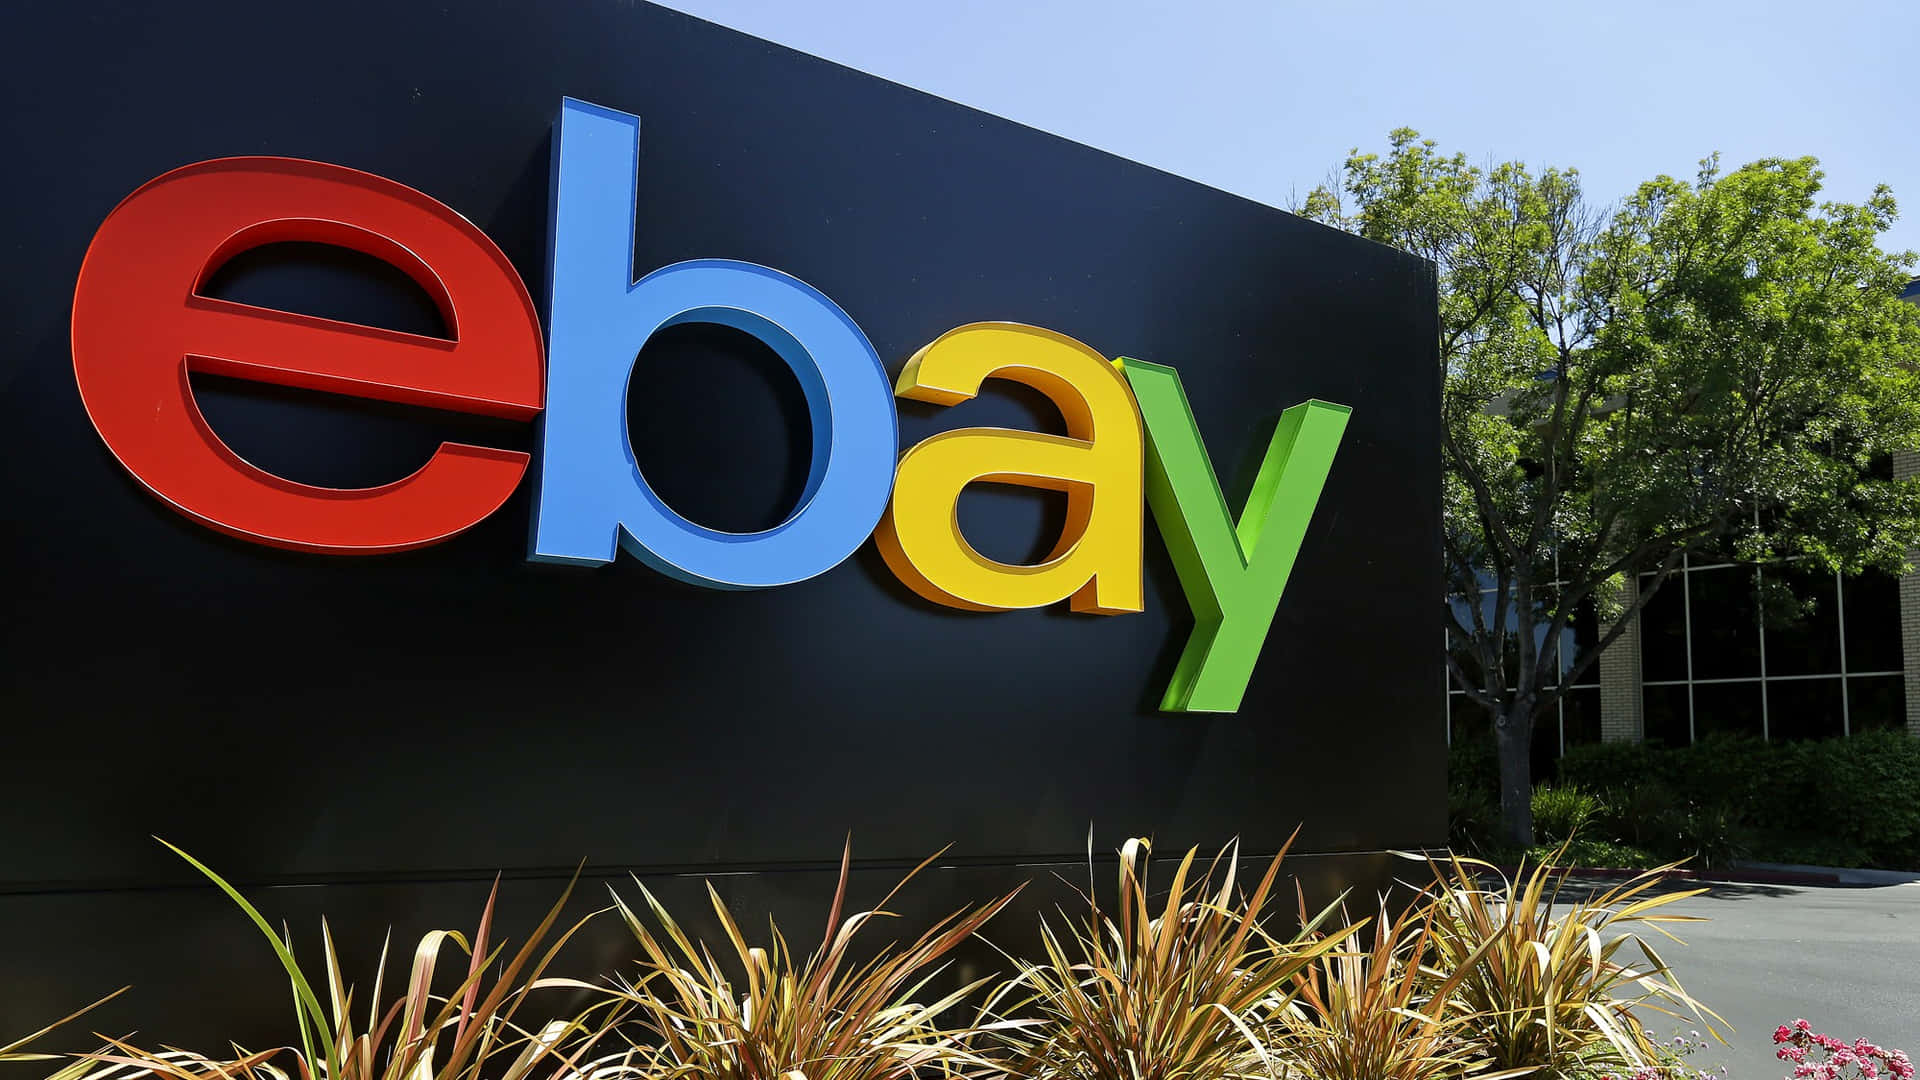 Become a savvy shopper and score the best deals on eBay